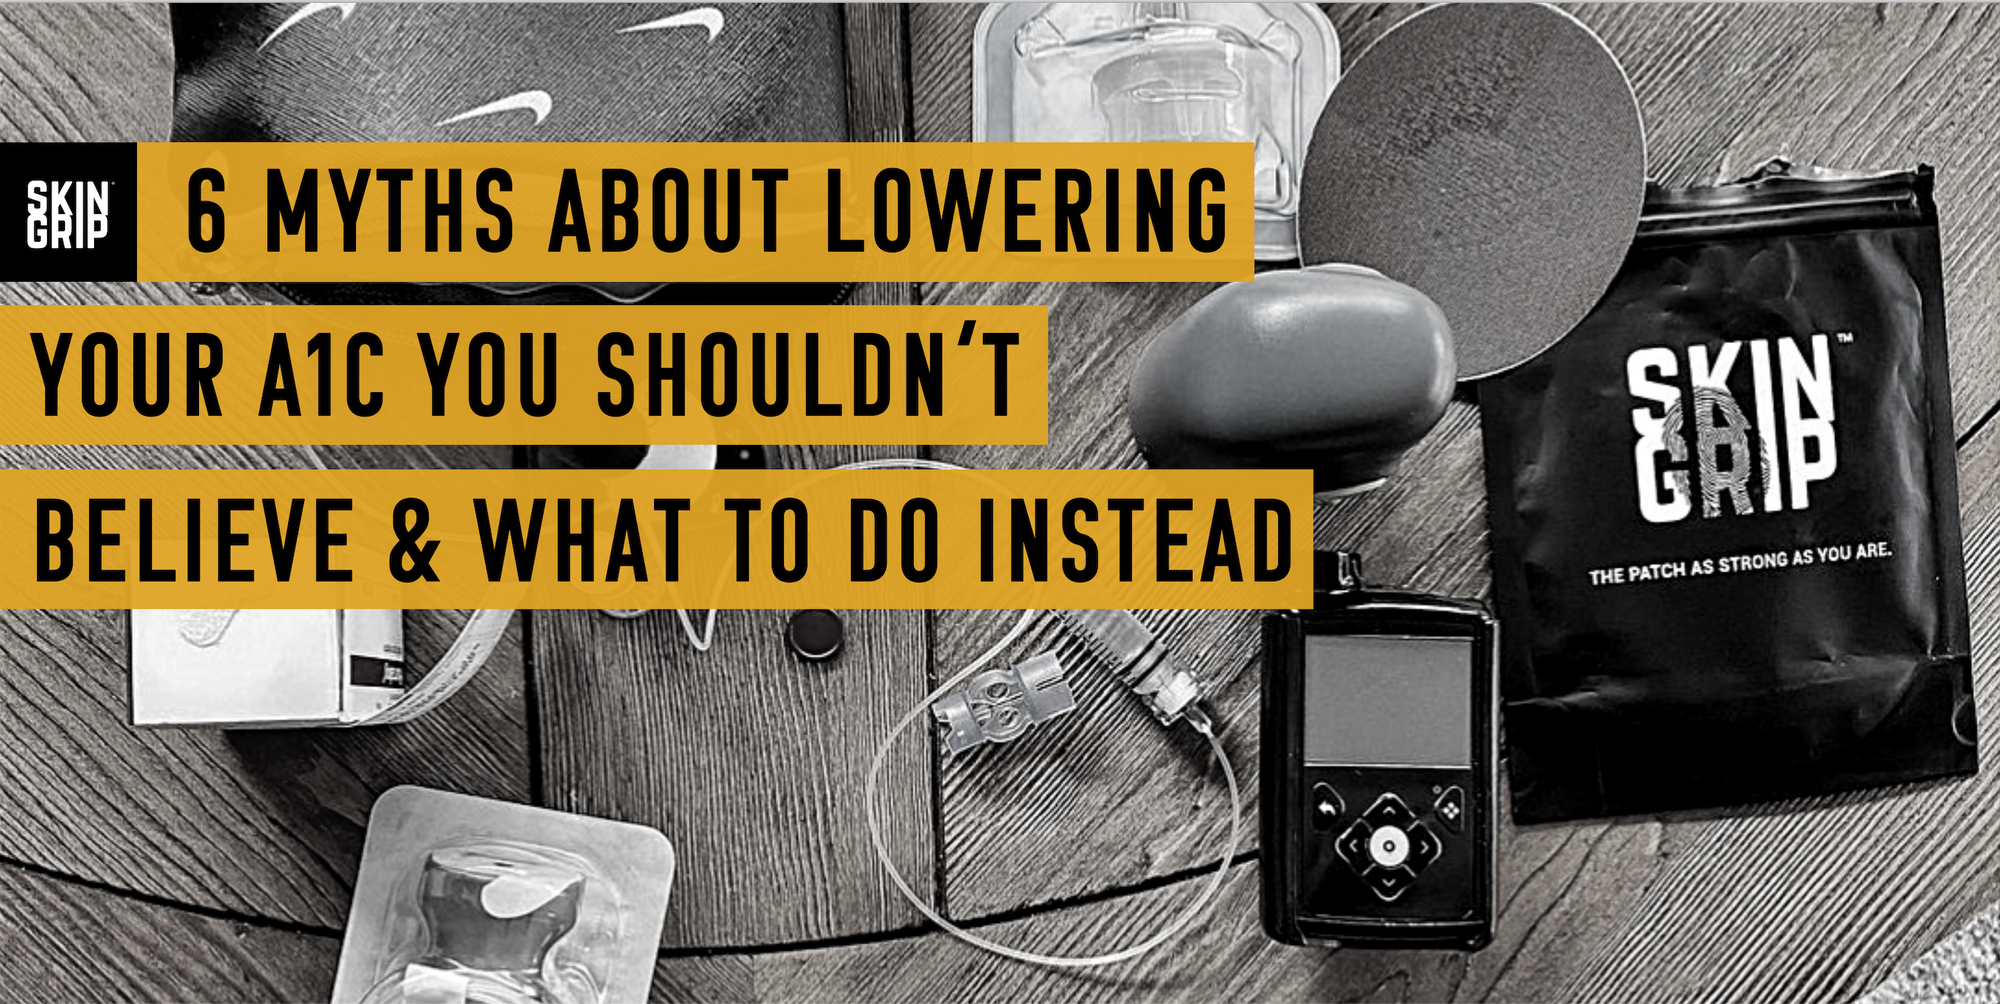 6 Myths About Lowering Your A1C You Shouldn’t Believe & What to Do Instead